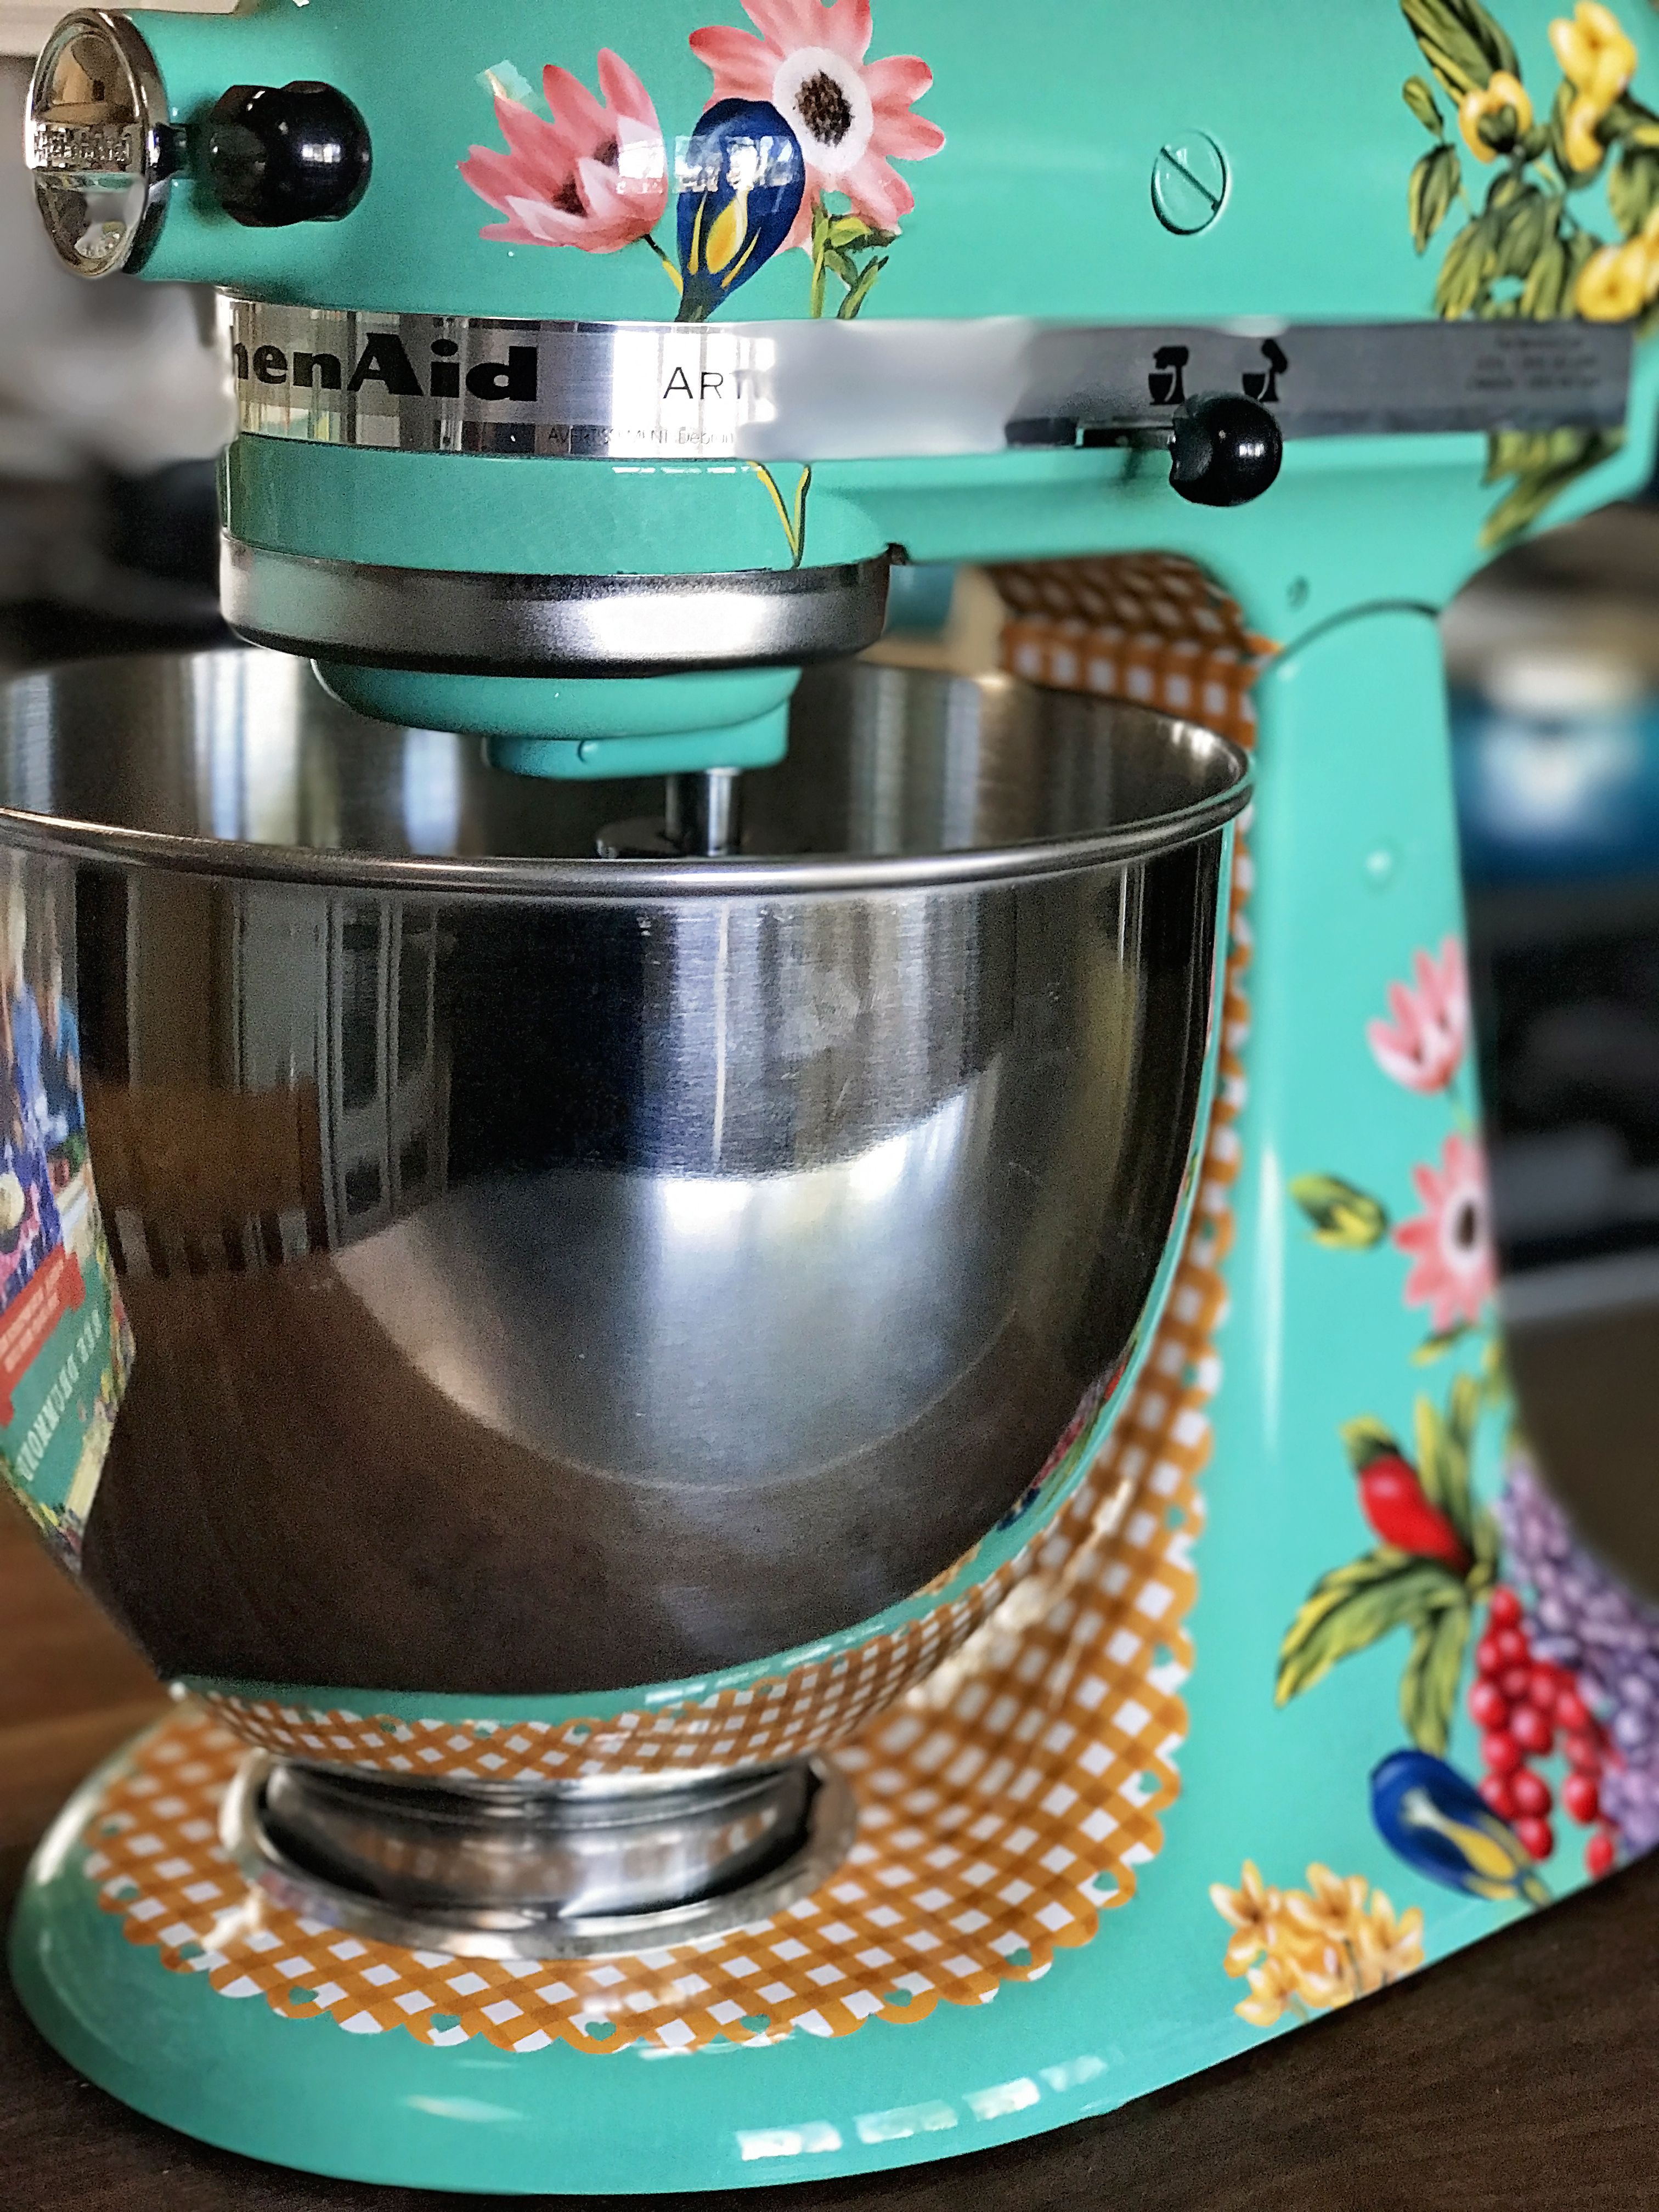 Dandy Meyer Lemons and a KitchenAid 5 Qt. Stand Mixer Giveaway (Closed) -  The Little Kitchen